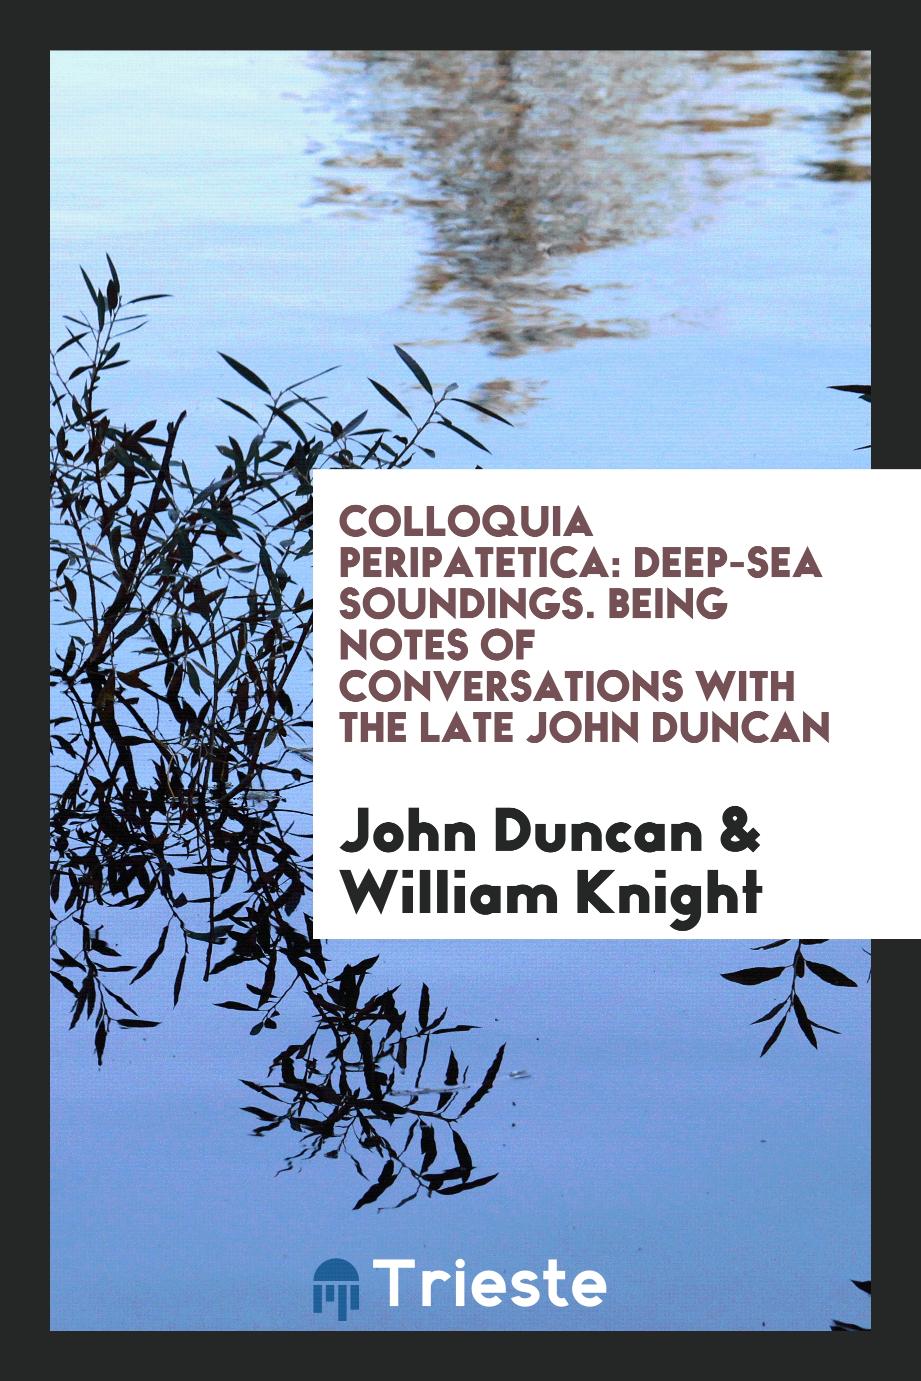 Colloquia Peripatetica: Deep-Sea Soundings. Being Notes of Conversations with the Late John Duncan